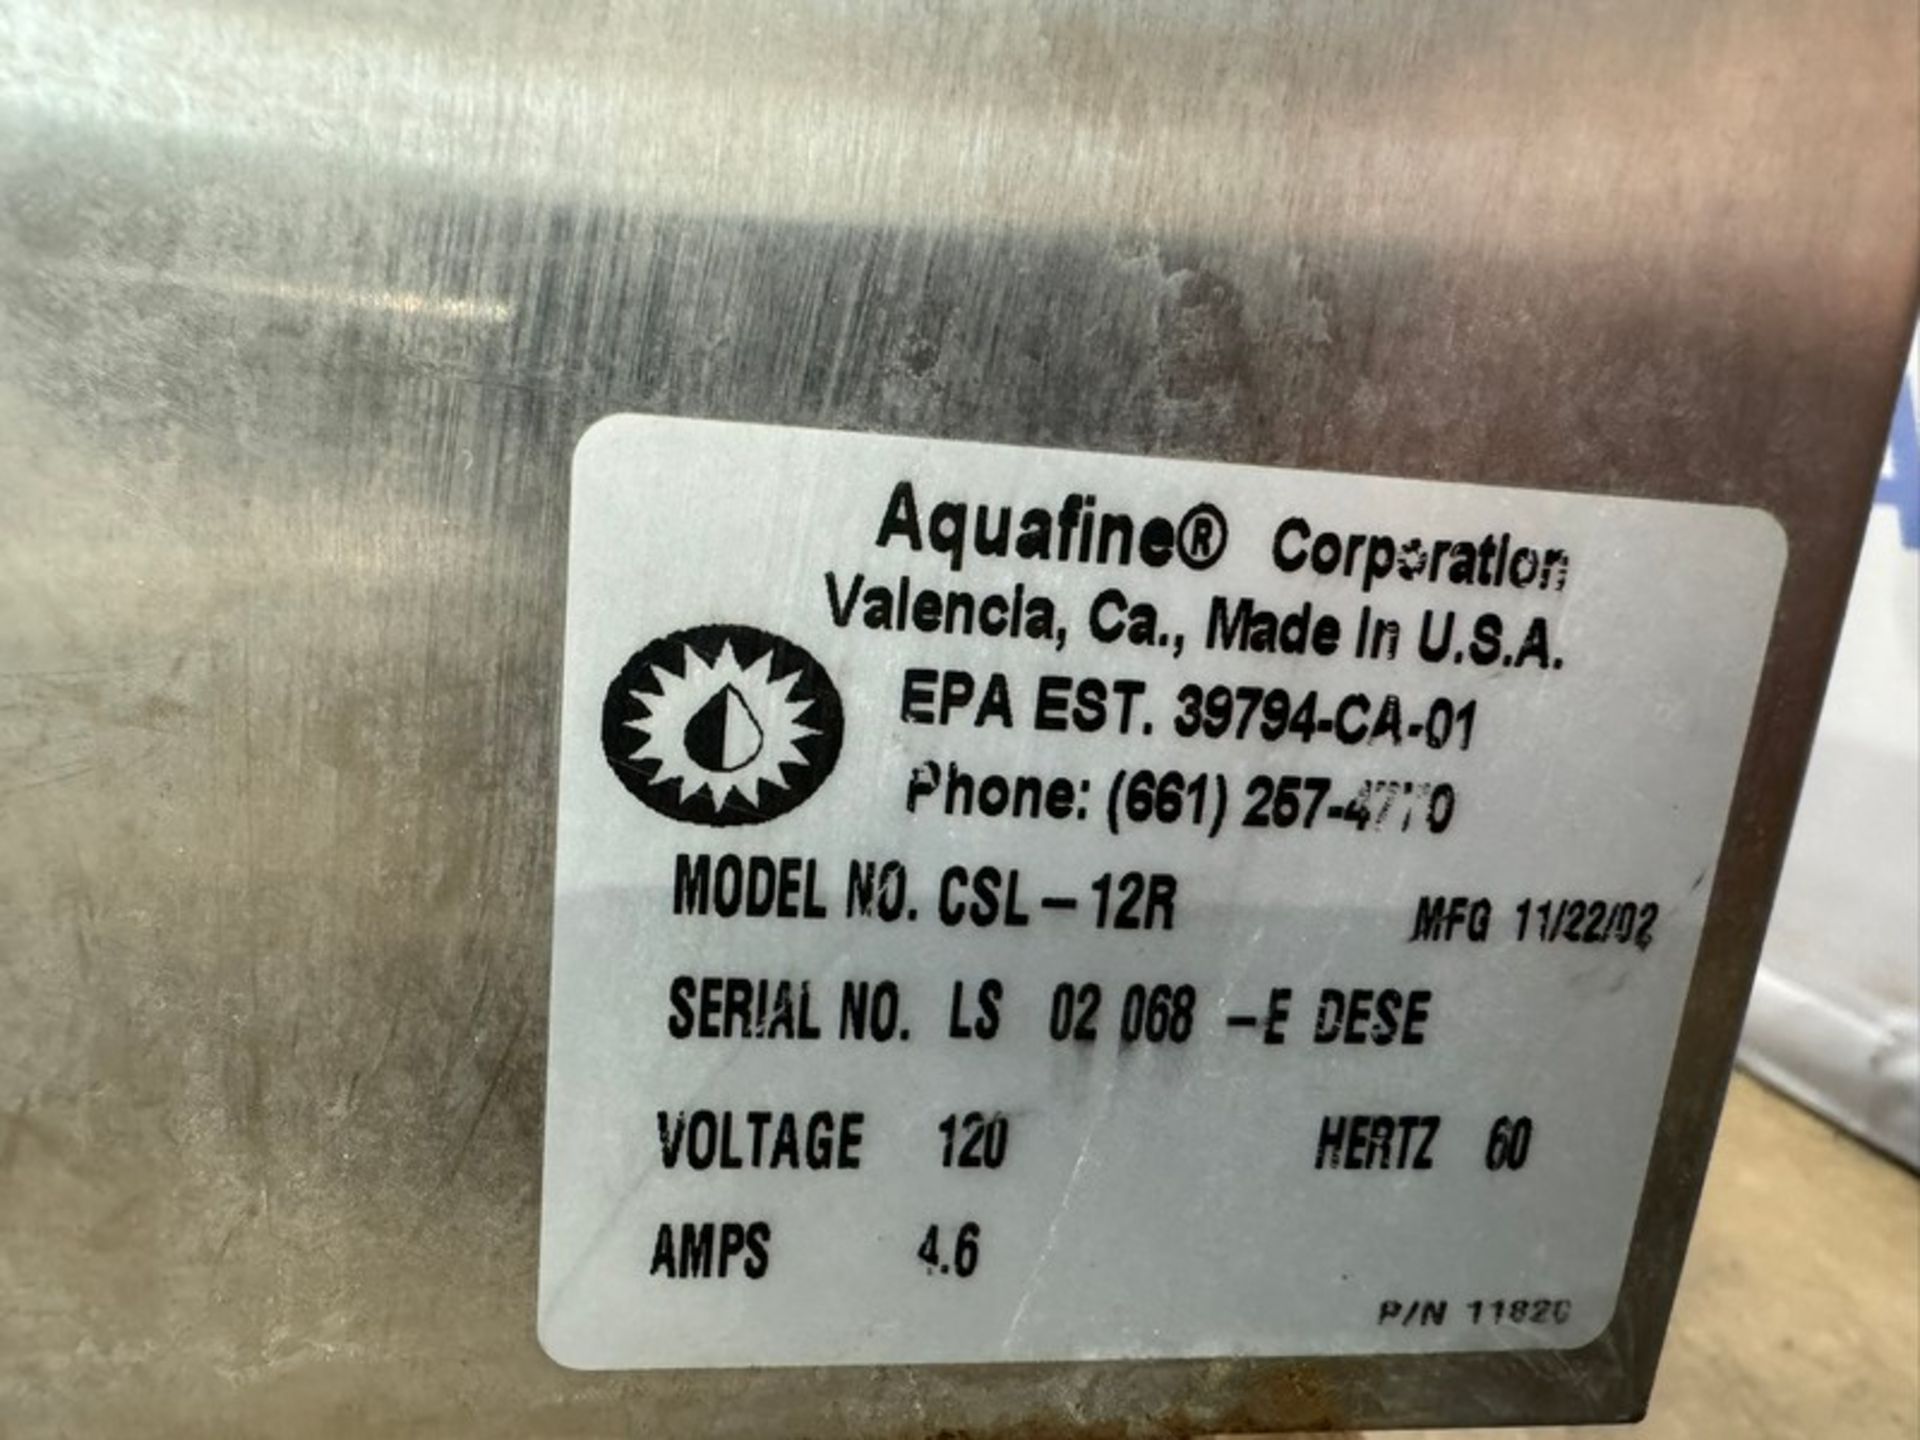 Aquafine S/S Ultraviolet Disinfection Unit, M/N CSL-8R, 120 Volts, with Aprox. 3" Clamp Type Inlet/ - Bild 6 aus 6